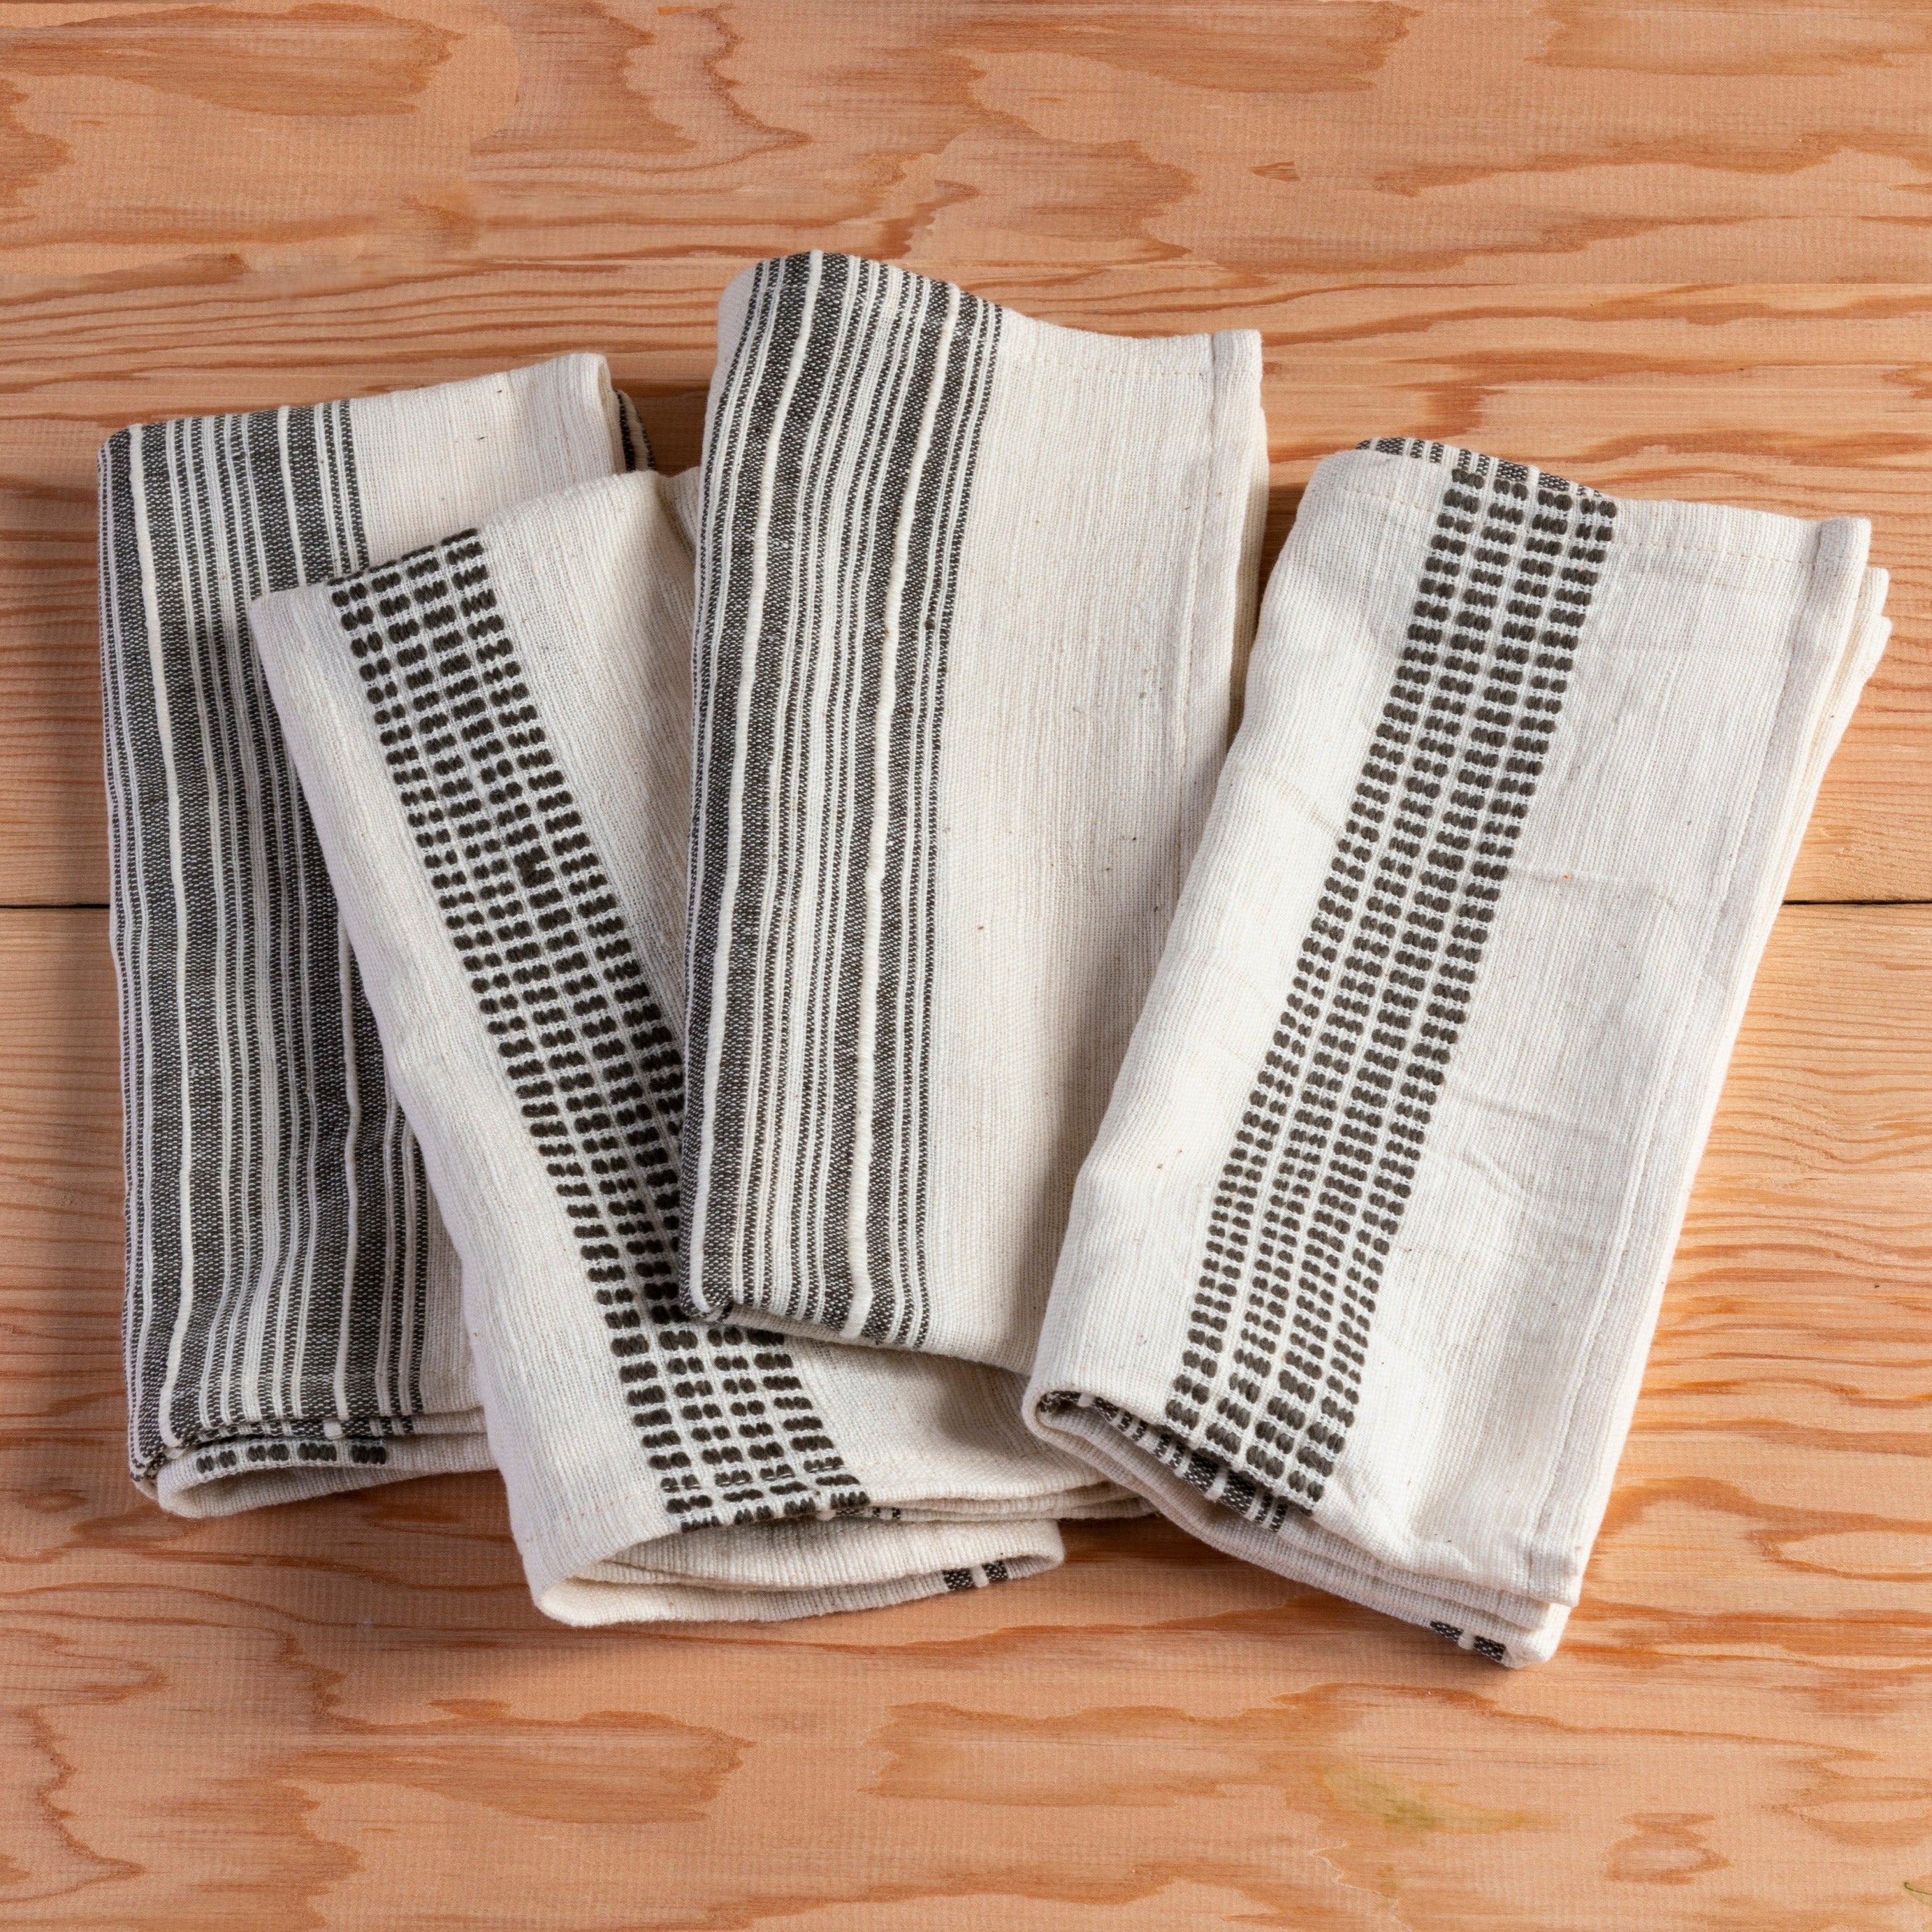 Aden Napkins, Natural with Grey, Set of 4